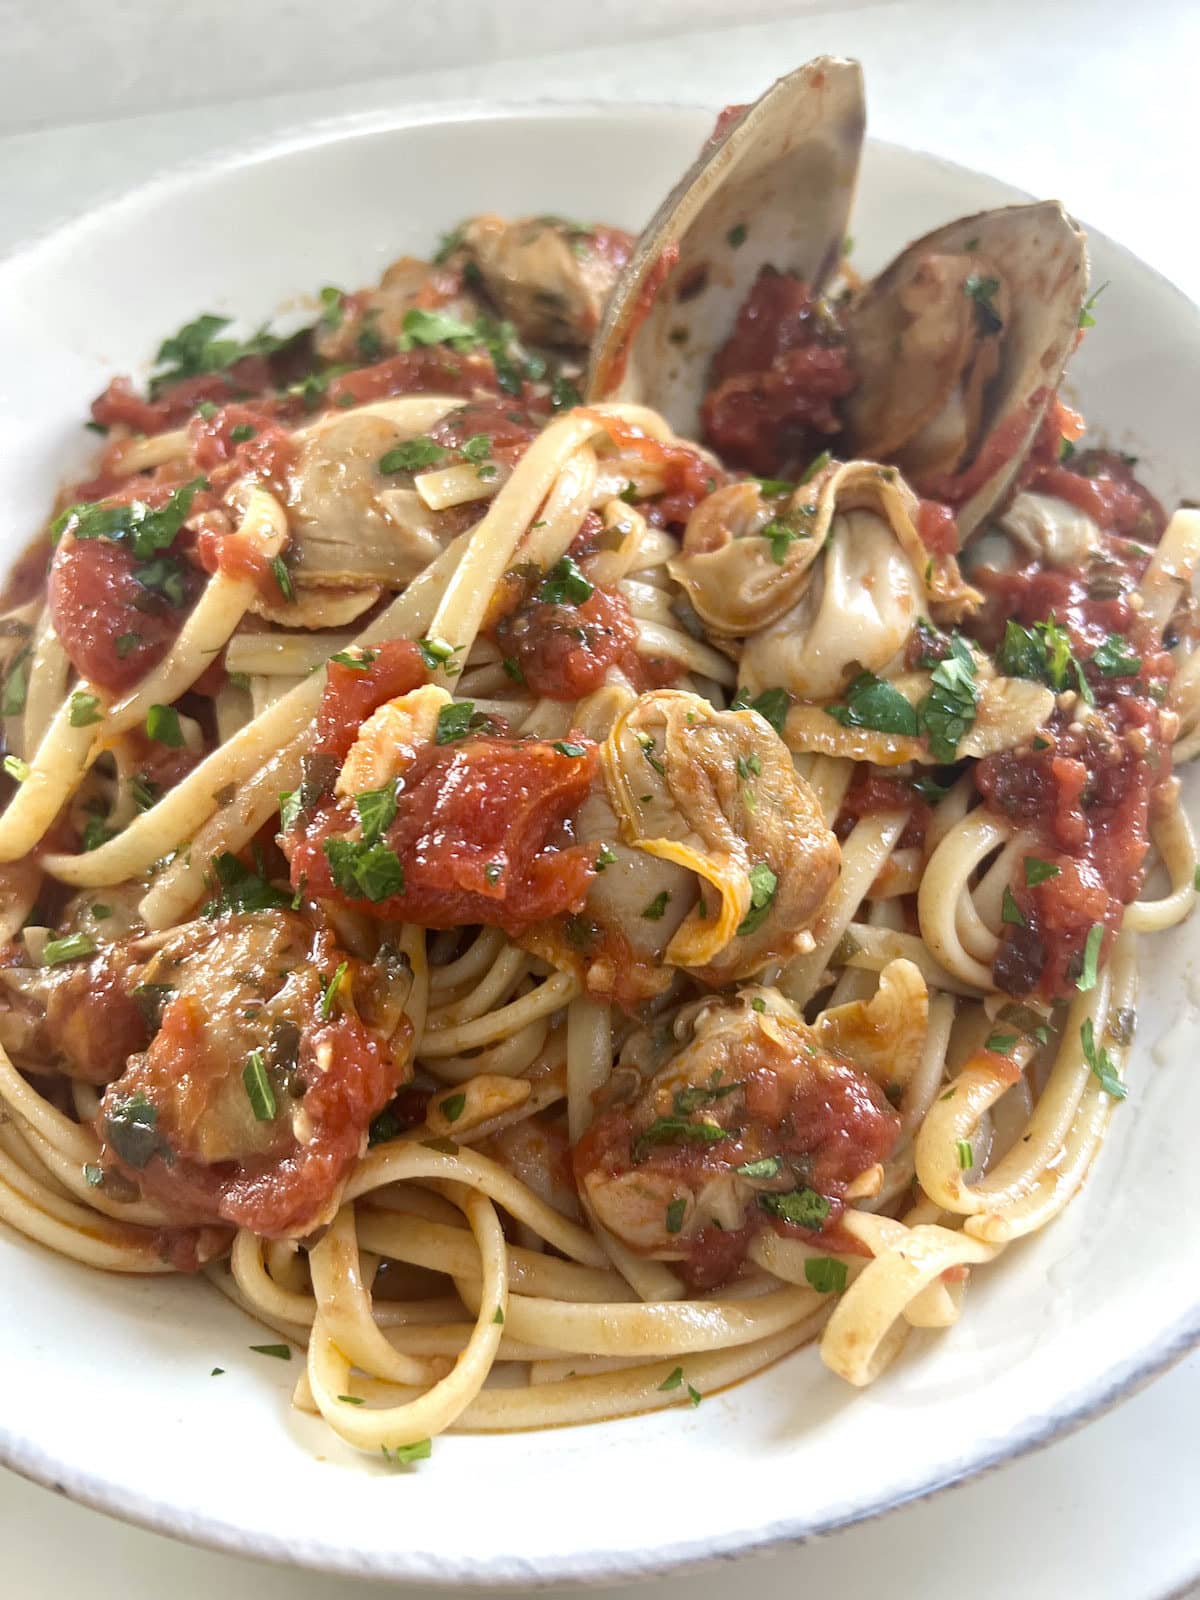 Authentic Italian Red Clam Sauce with Linguine styled in white bowl.